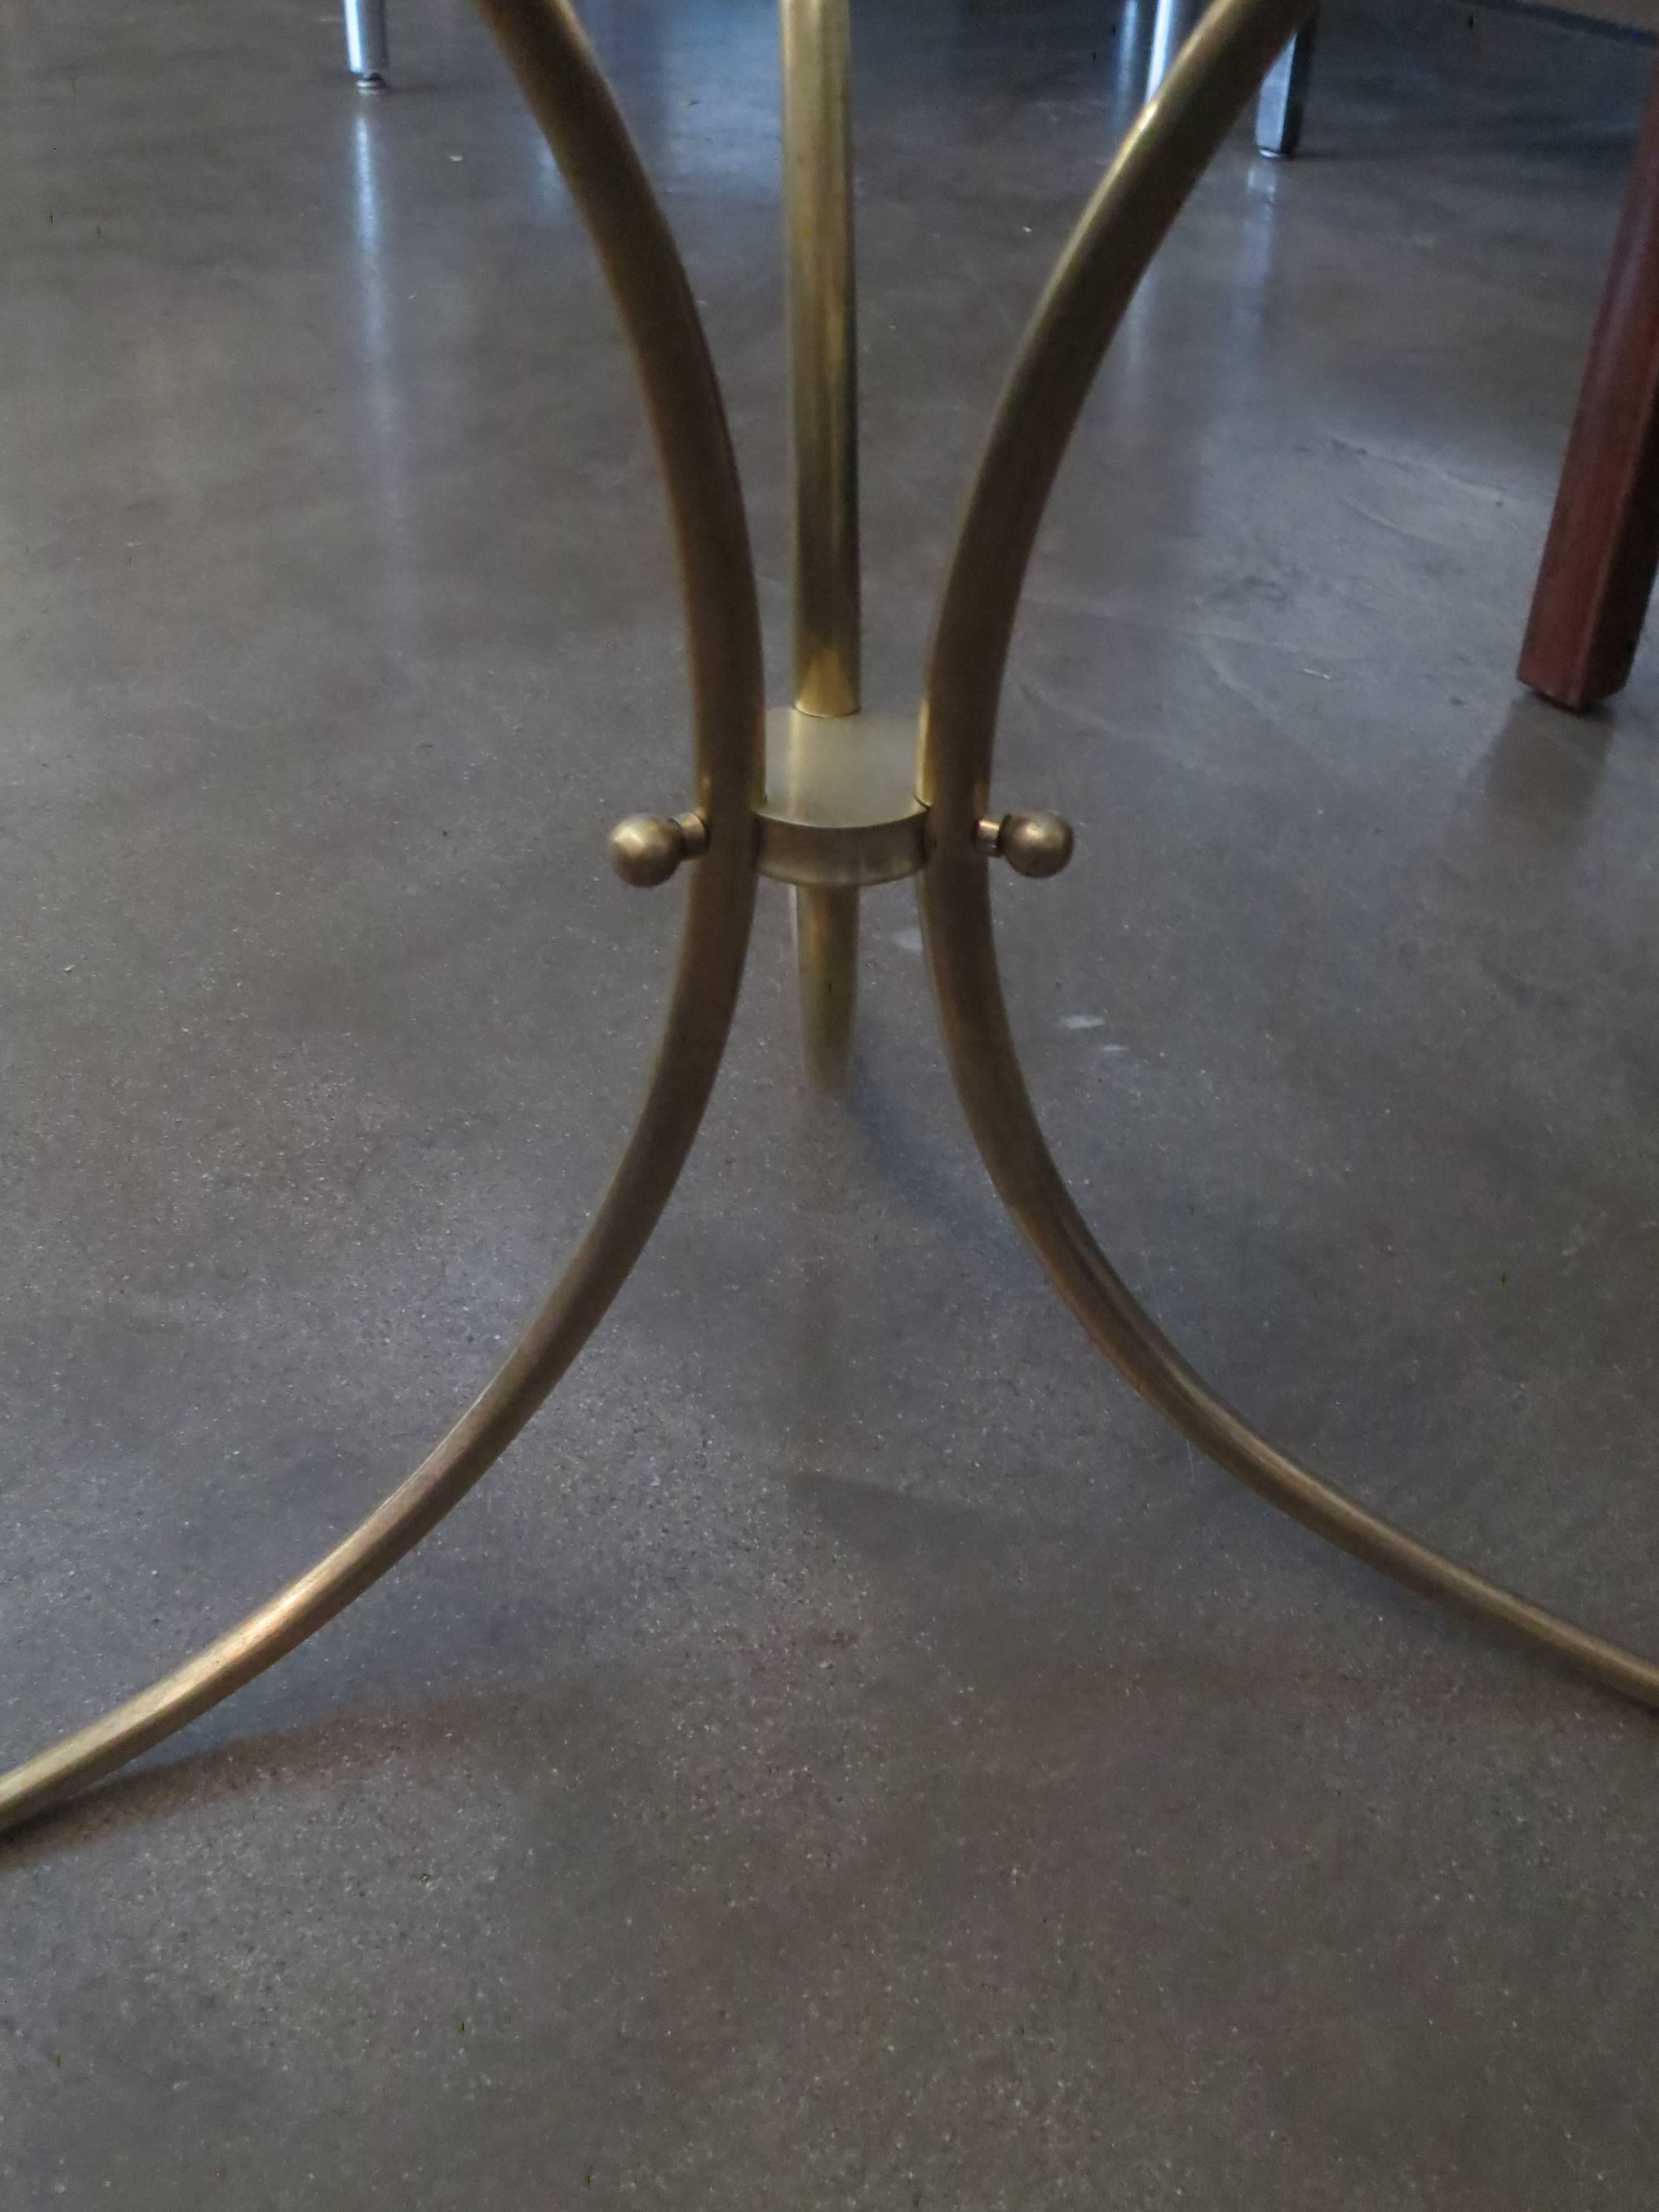 Sophisticated brass and glass table. The curving legs affix with elegant brass orbs to a center ring. The legs taper to a slender foot. A beautifully detailed side table.